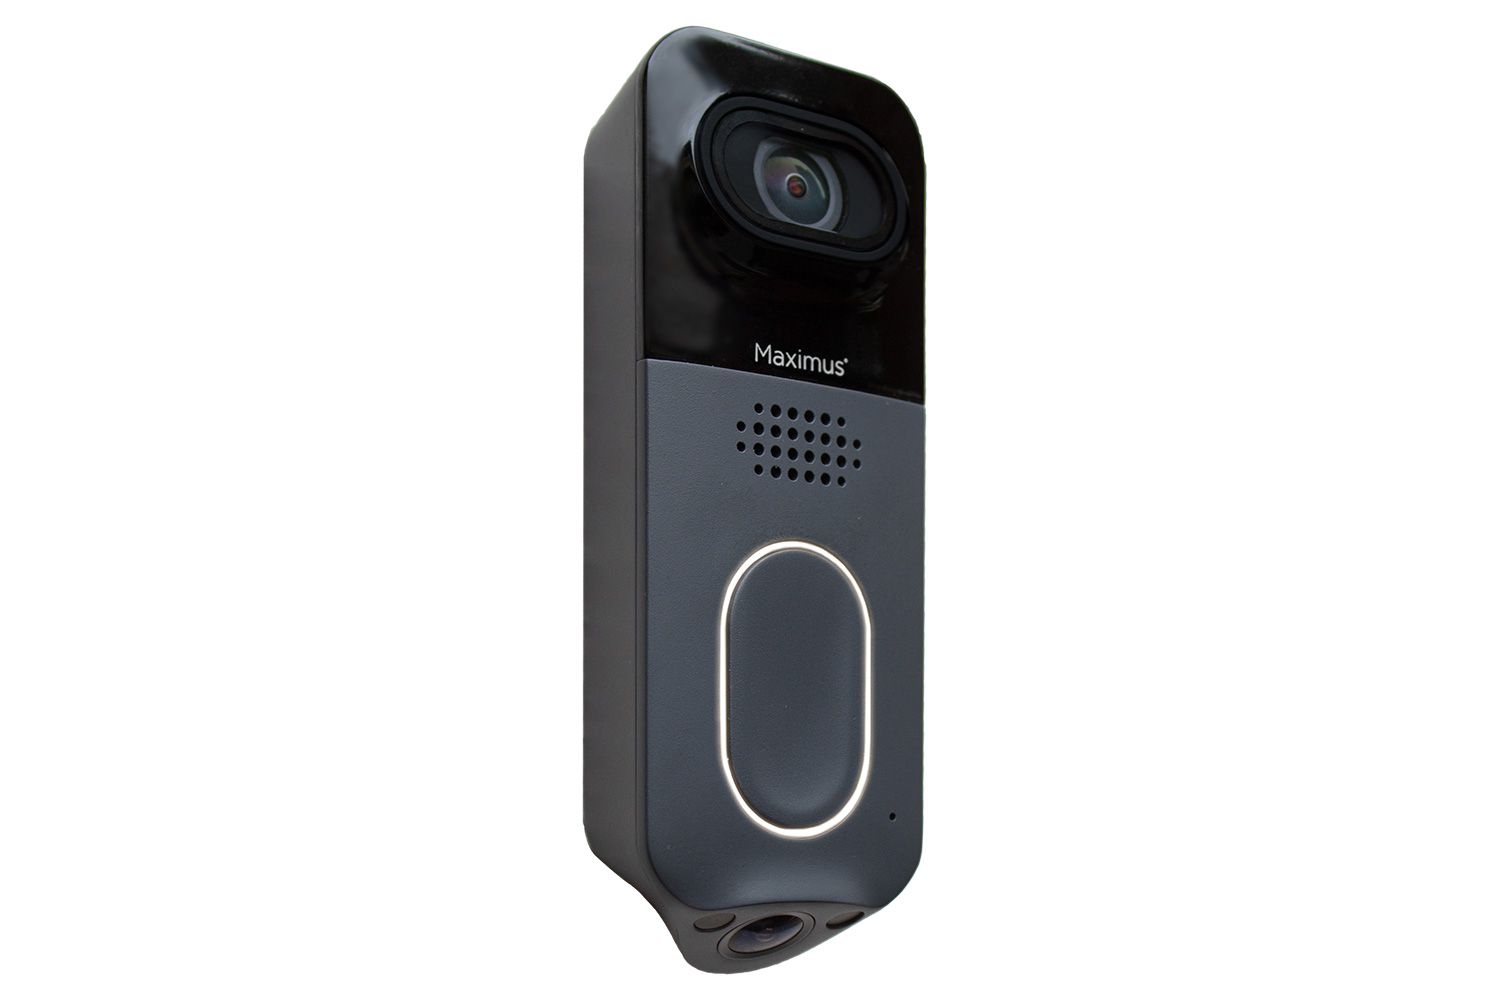 Eufy Introduces Its First Dual Camera Smart Video Doorbell